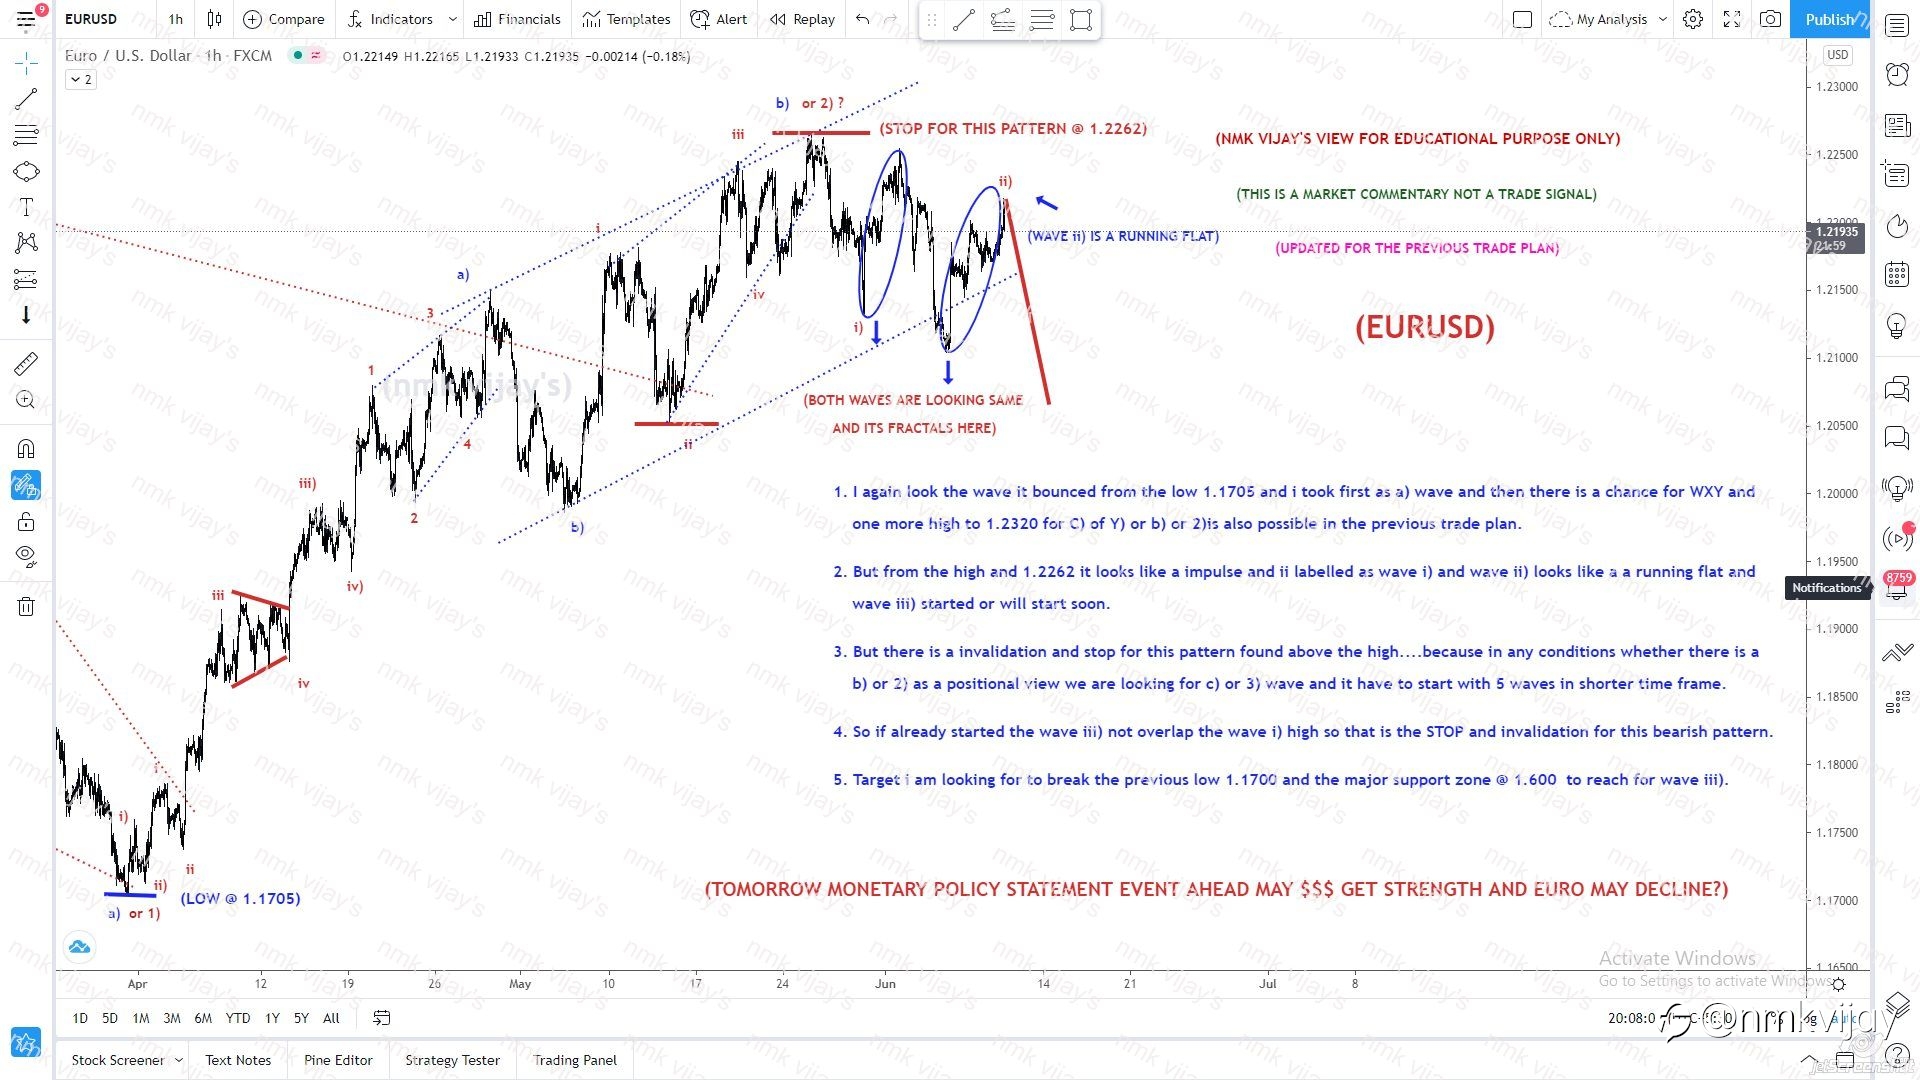 EURUSD-Wave ii) ended in a running flat and We are in wave iii) of 3) or C) Stop @ 1.2270 for TP @ 1.1600